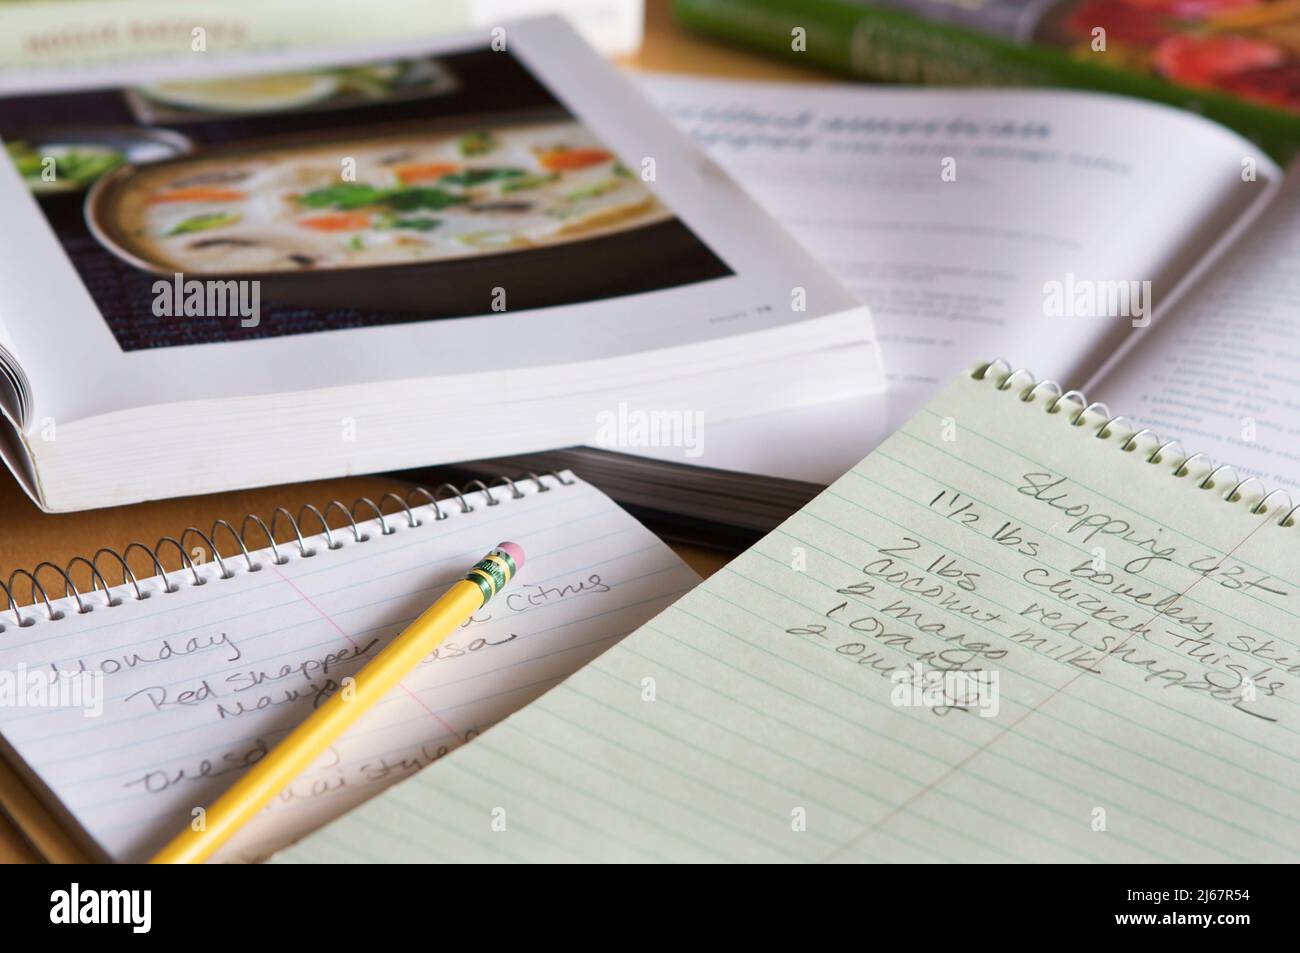 Open cookbooks, pencil, and handwritten lists for shopping and meal planning spread on a table in natural light. Stock Photo